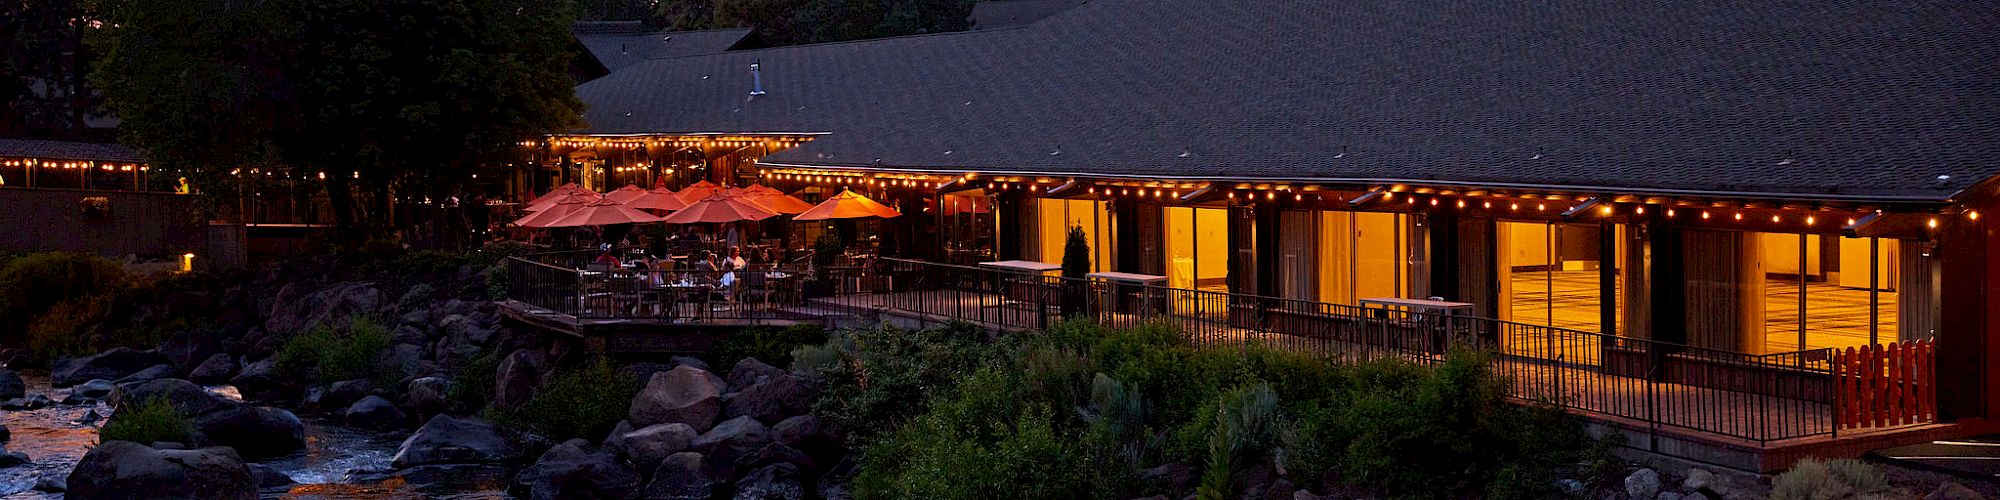 An outdoor restaurant with string lights is situated next to a rocky river, surrounded by trees at dusk, creating a serene atmosphere.